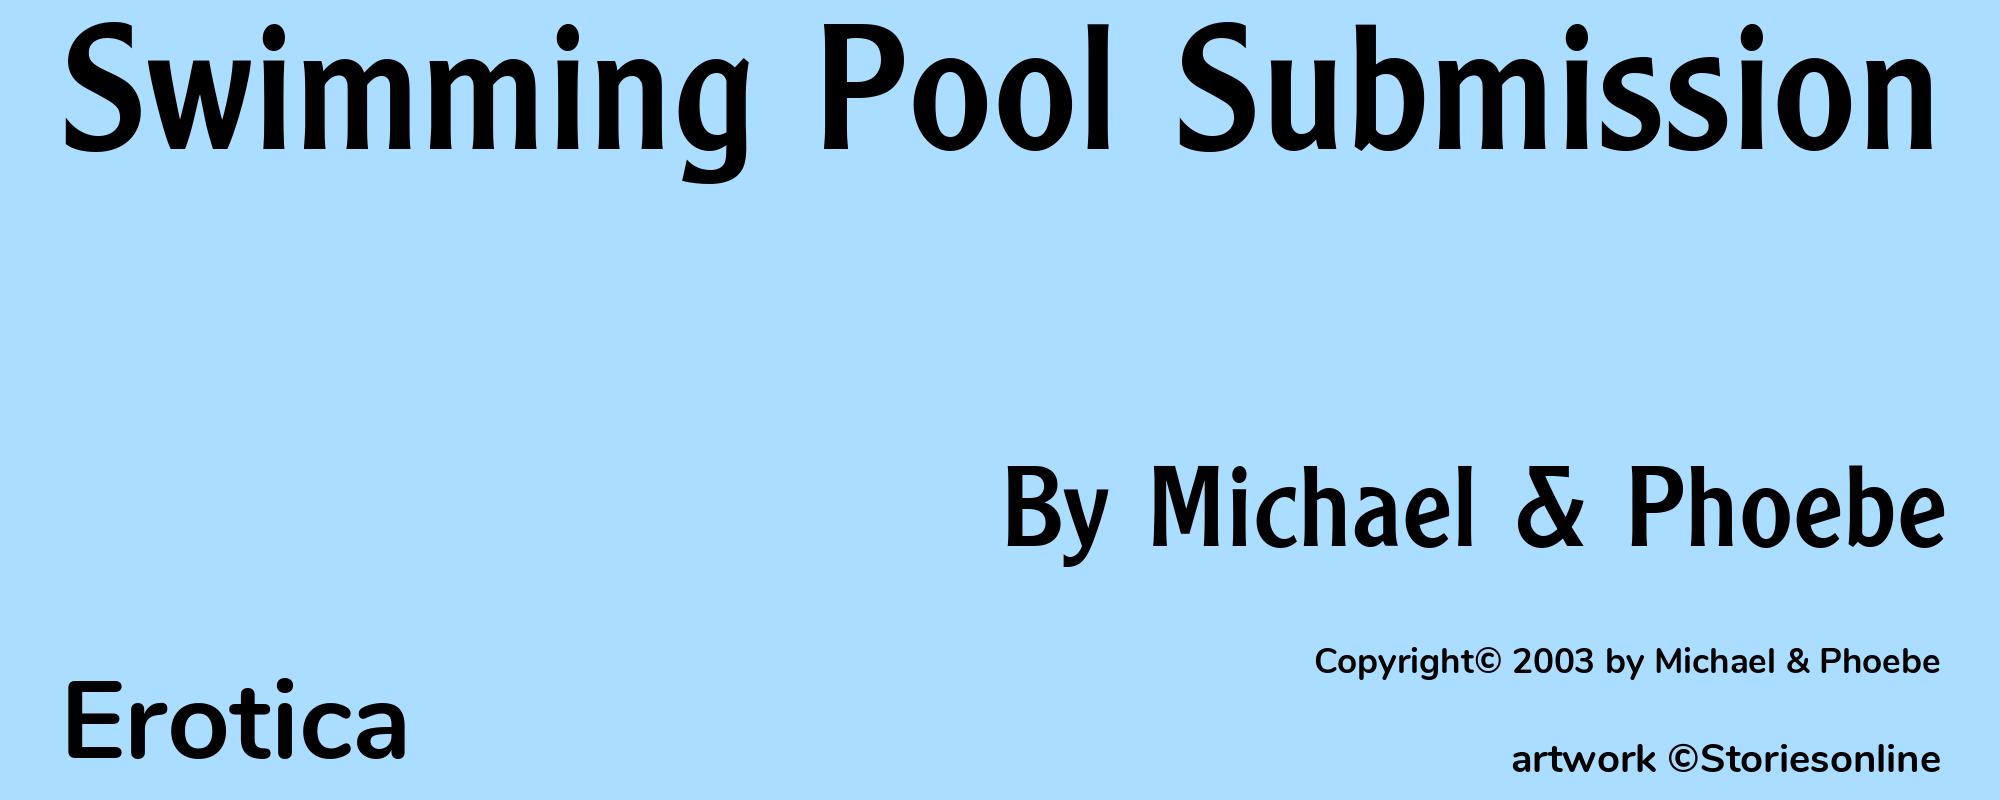 Swimming Pool Submission - Cover